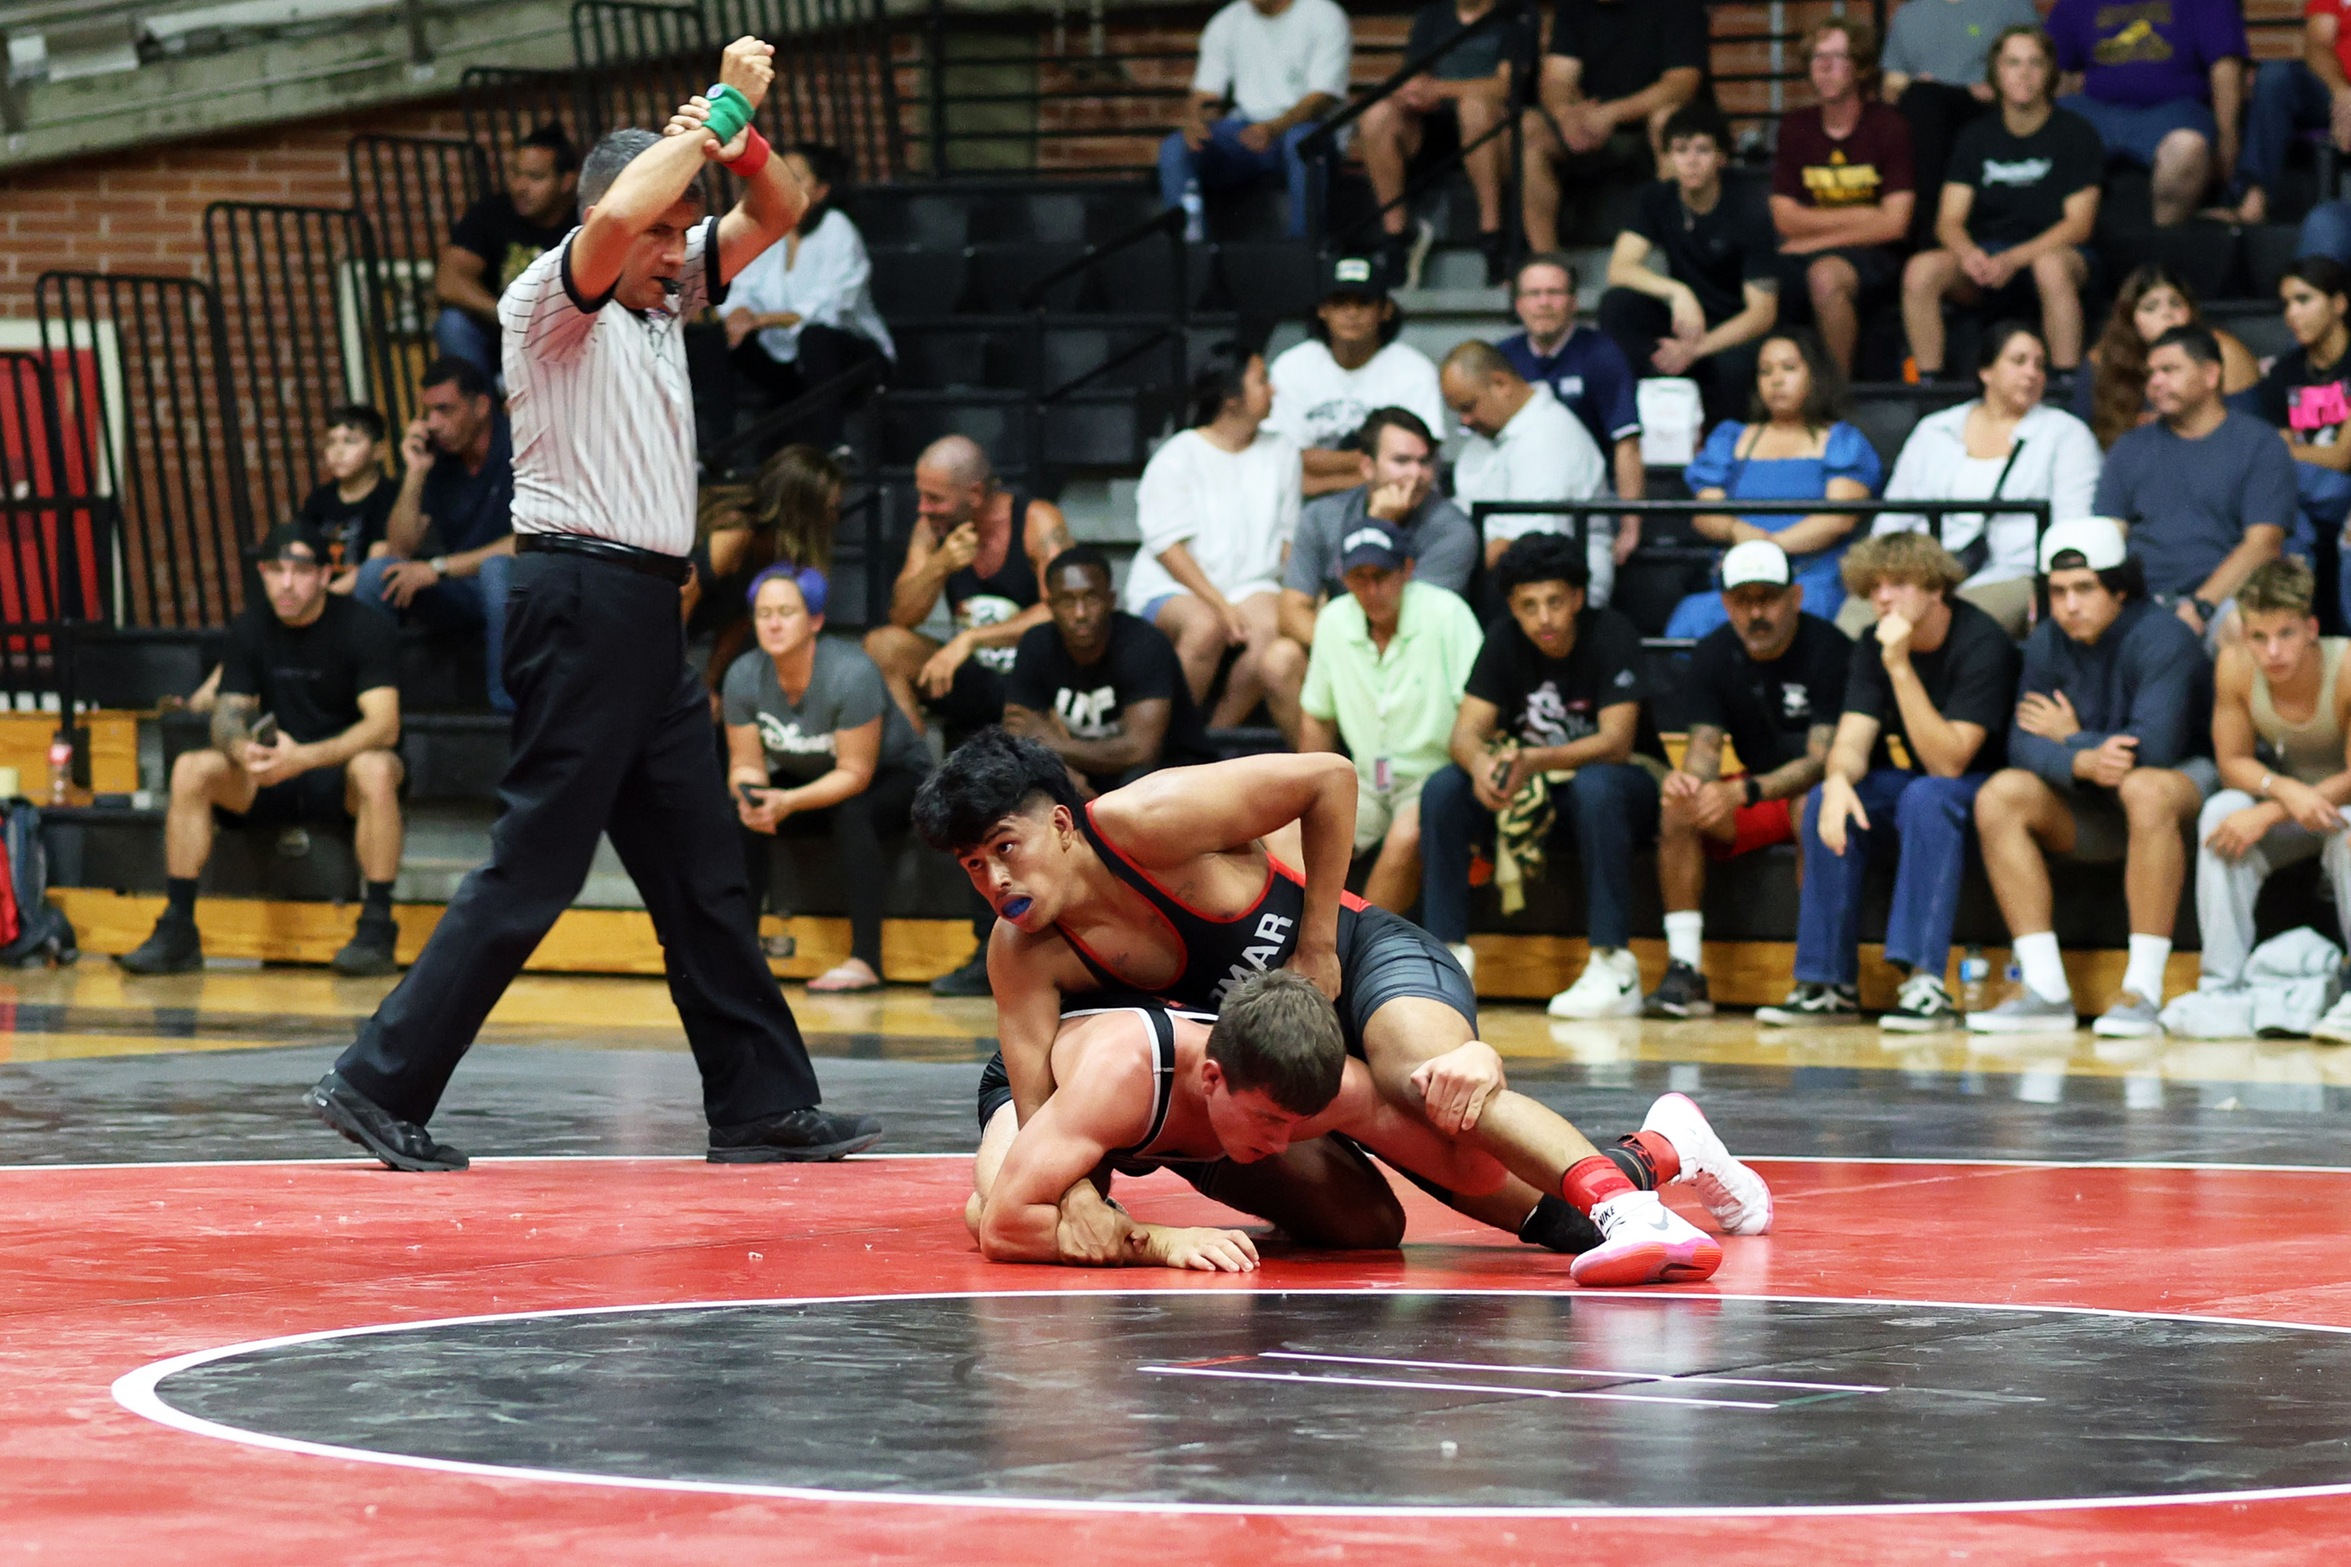 Comets finish in 4th at ELAC Brawl